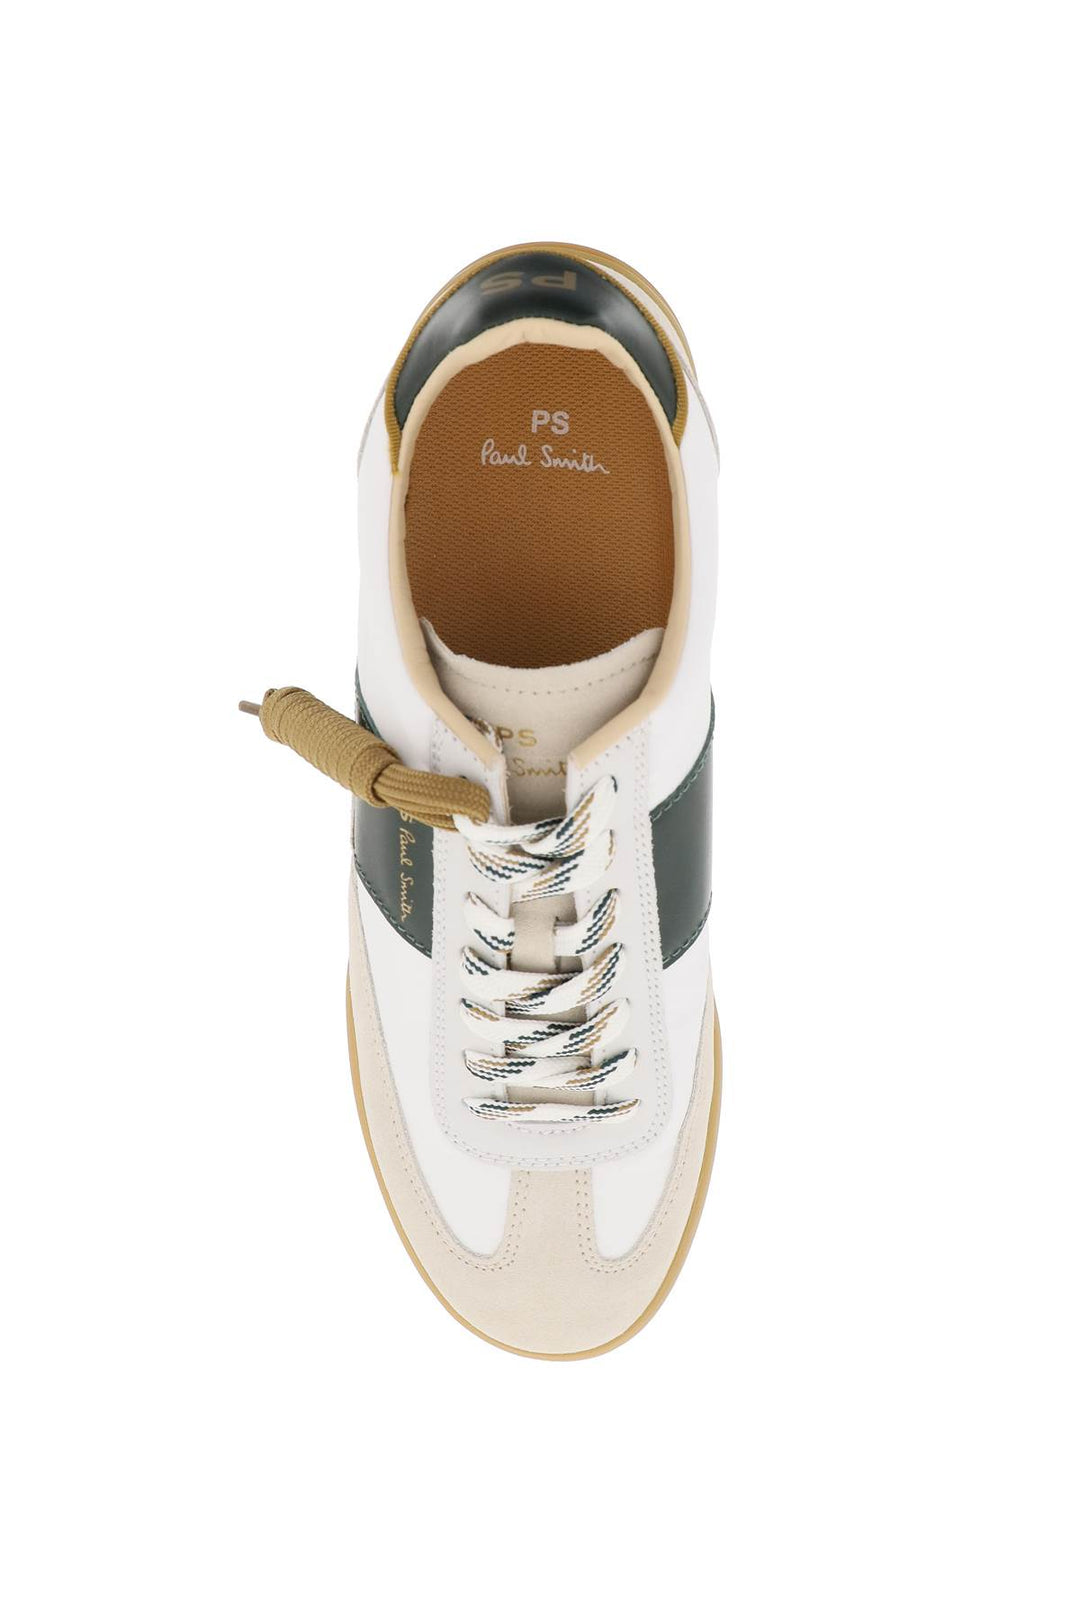 Ps Paul Smith Leather And Nylon Dover Sneakers In   Bianco